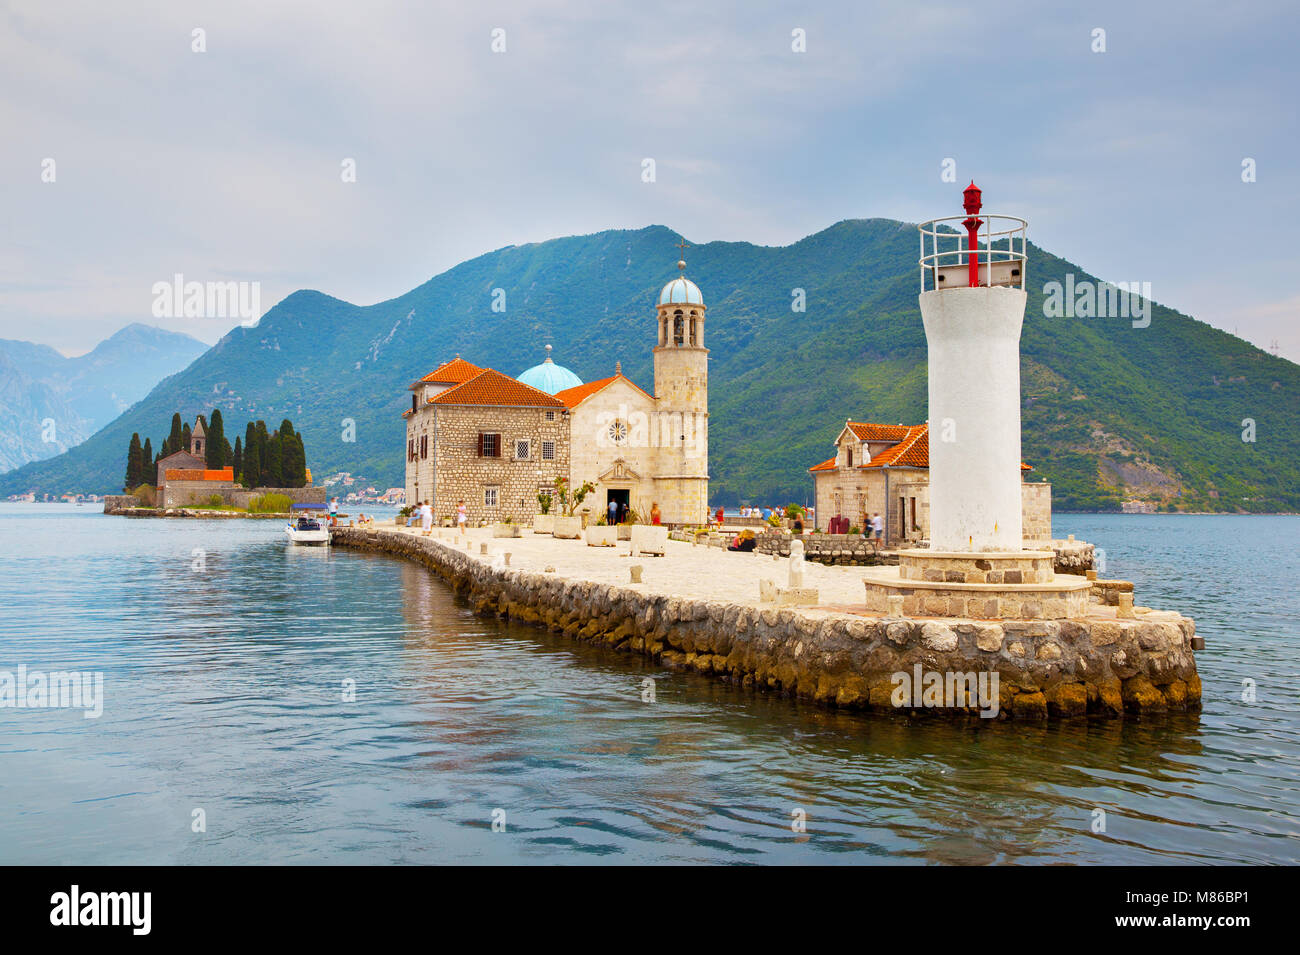 Our Lady of the Rocks church and lighthouse on small island in the Kotor Bay near Perast town, Montenegro Stock Photo